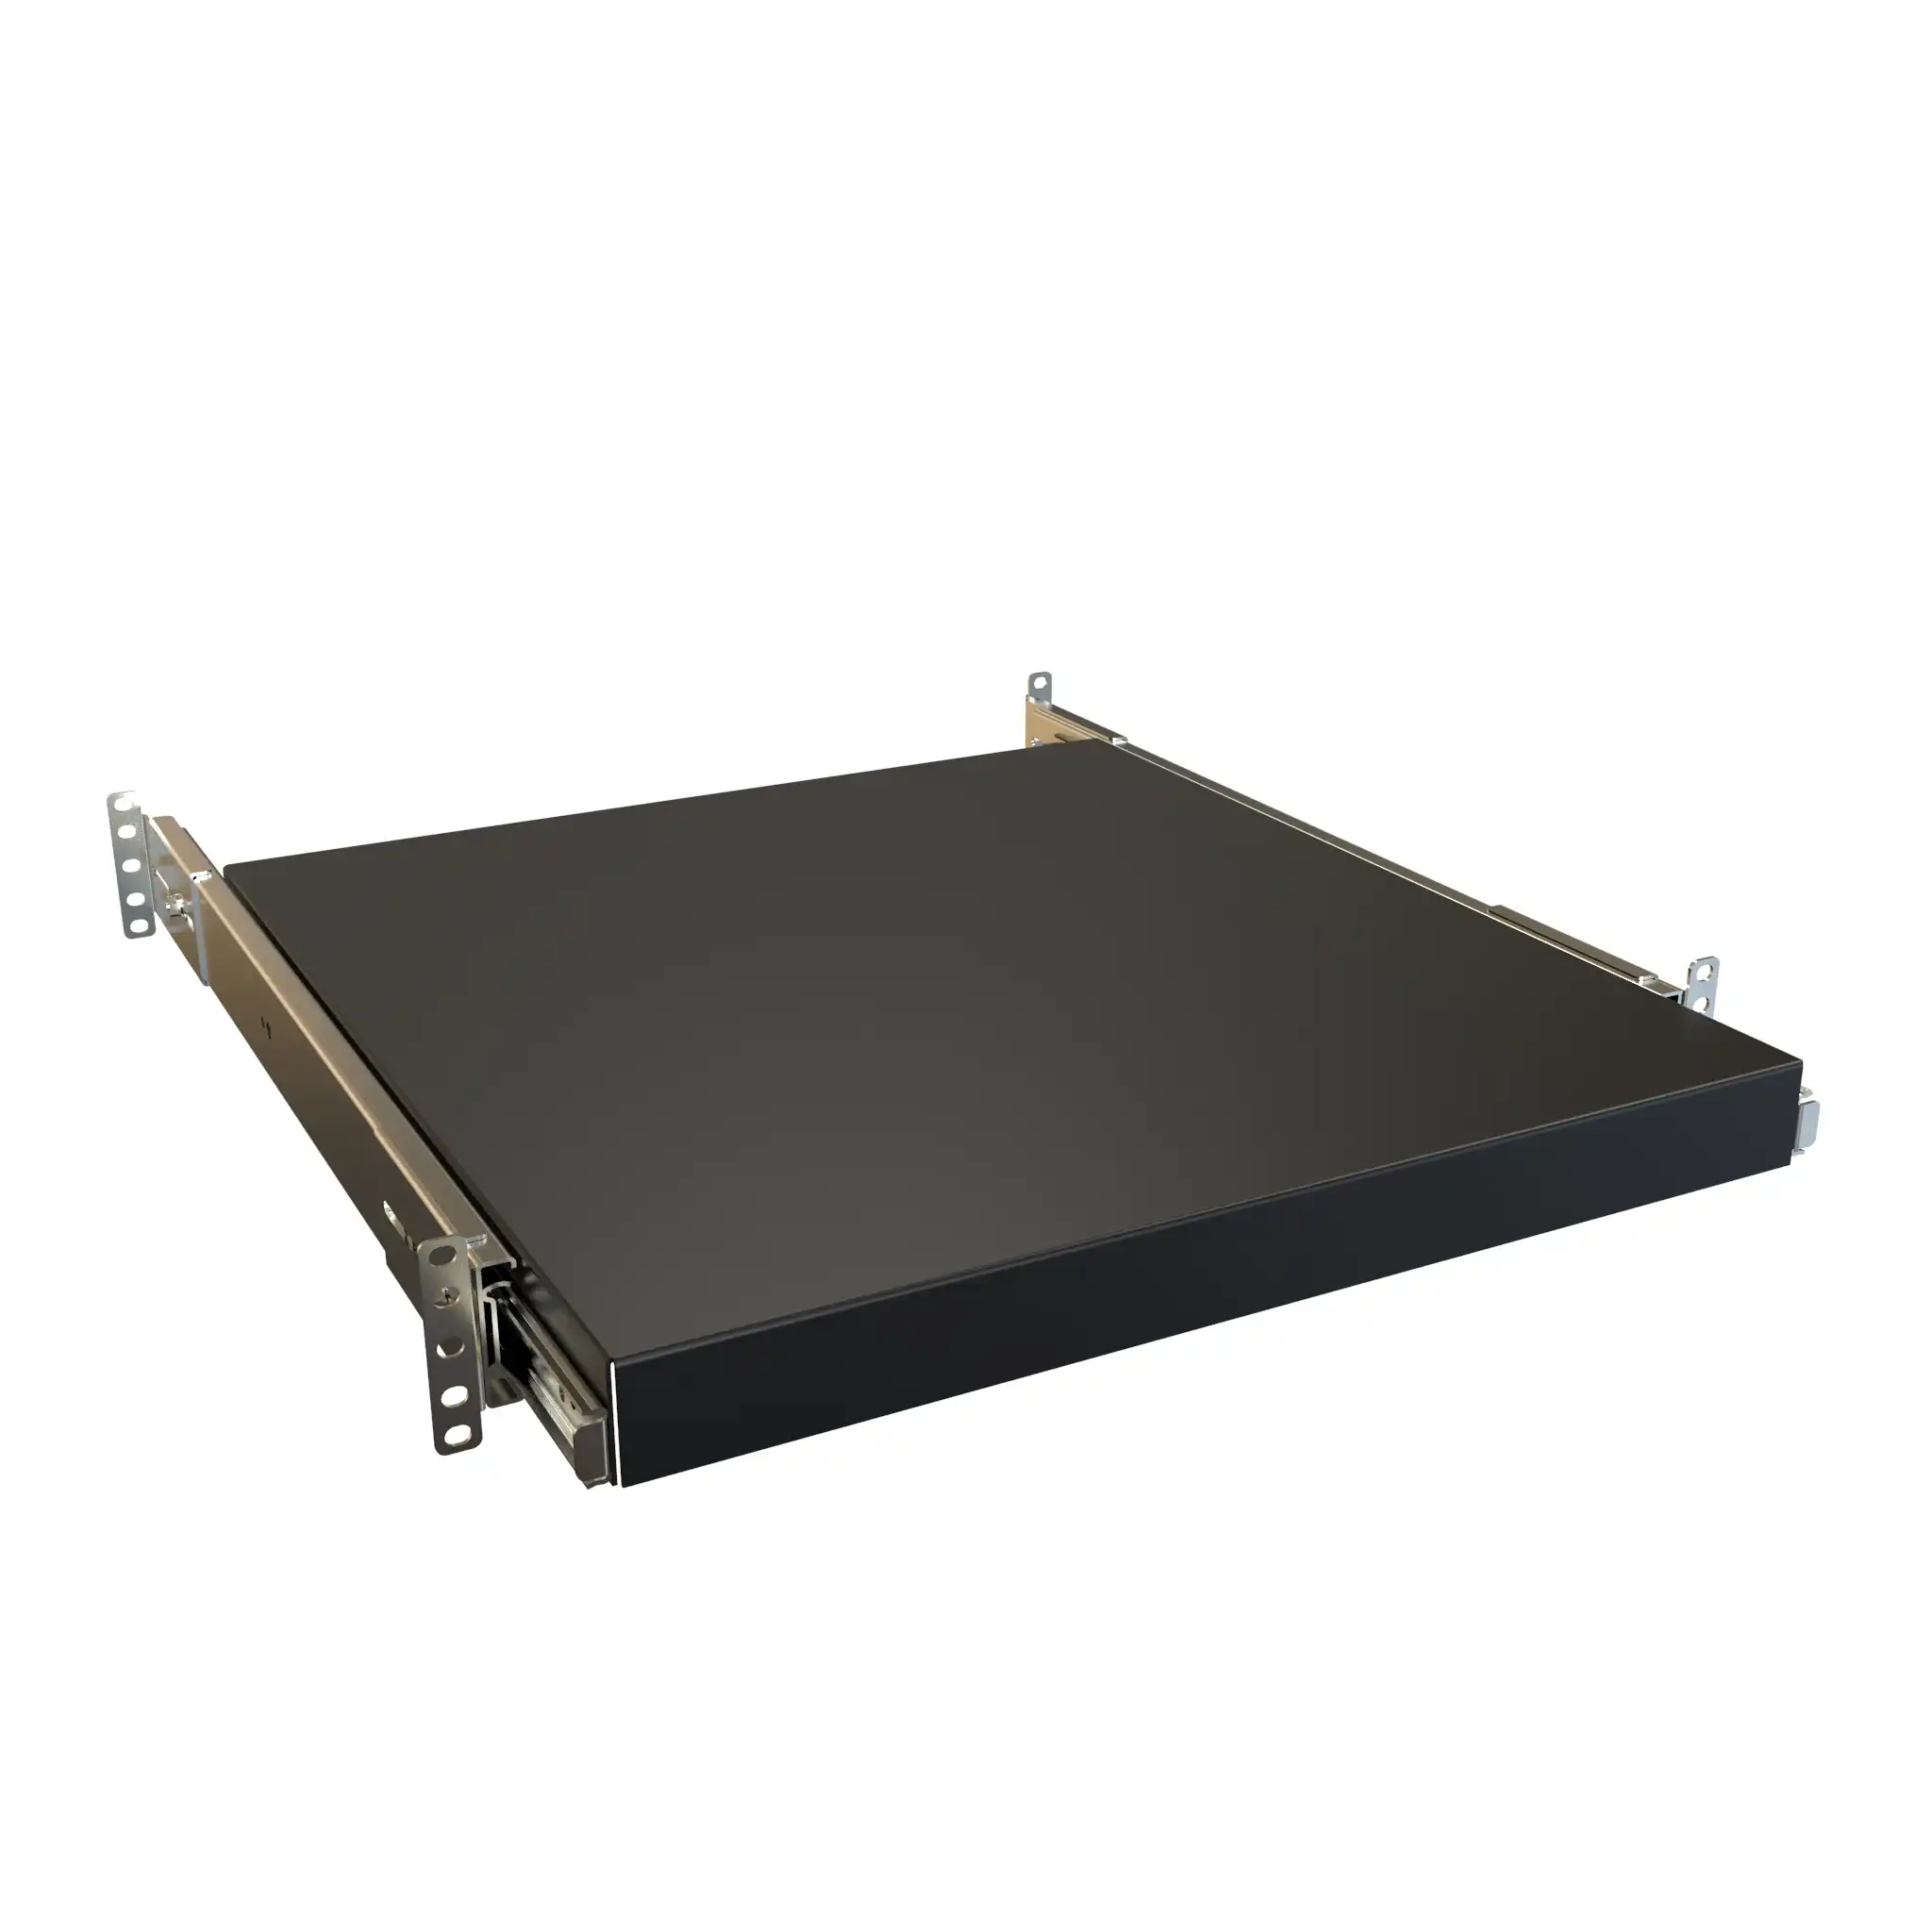 RSUS Series - Hammond Manufacturing Rack Solutions at KGA Enclosures Ltd - Click for a larger image